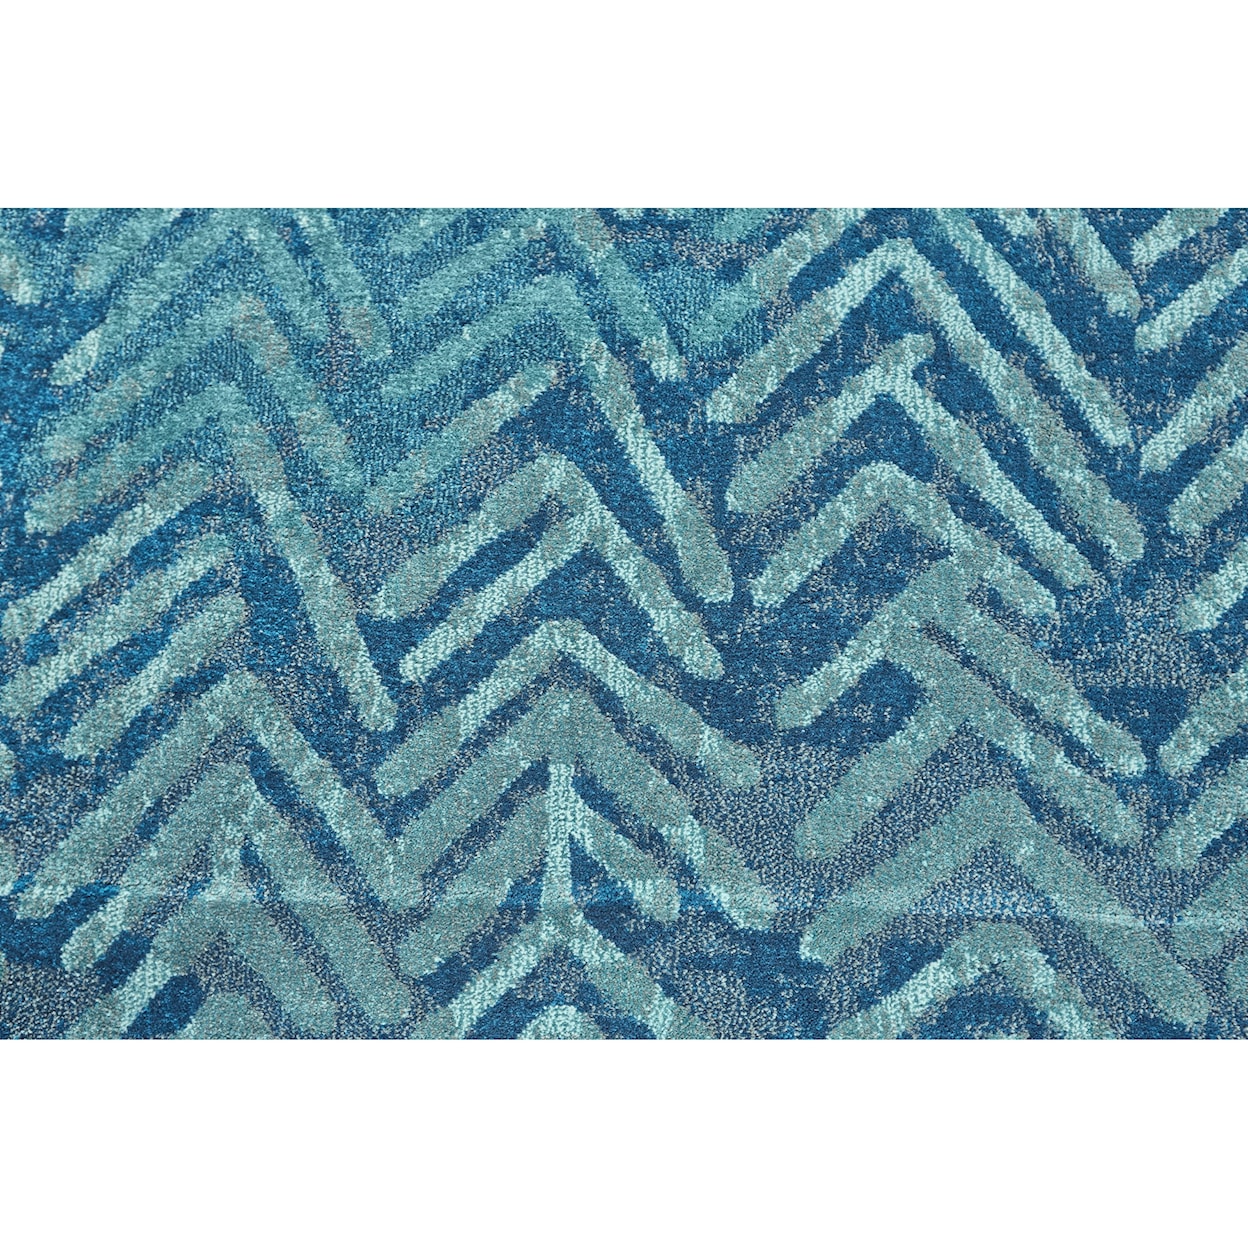 Feizy Rugs Brixton Pacific 8' X 11' Area Rug